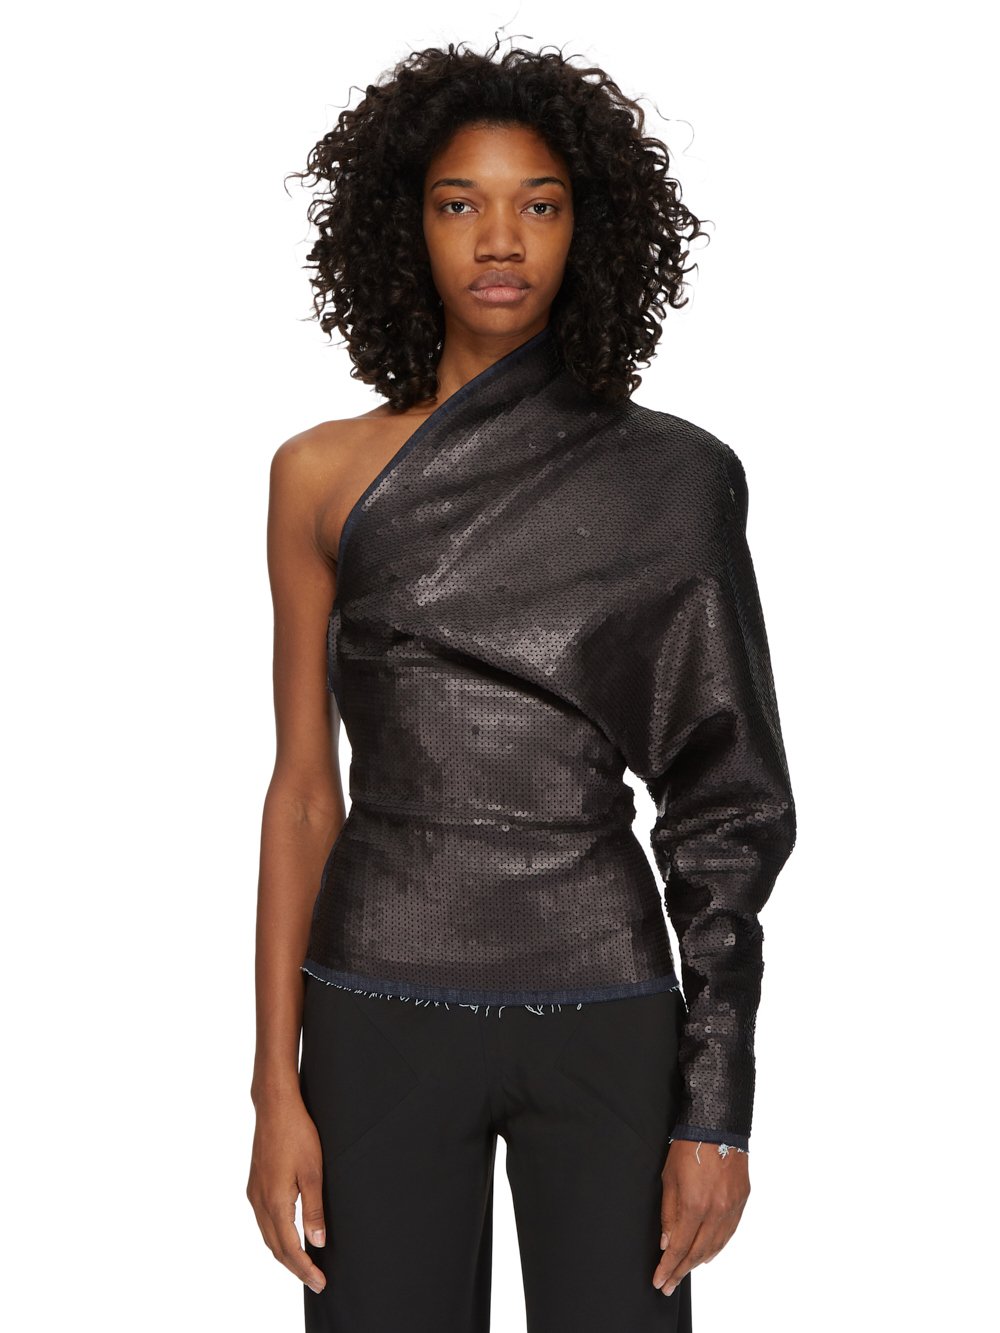 RICK OWENS FW23 LUXOR RUNWAY ONE SLEEVE TOP IN BLUE AND BLACK SEQUIN EMBROIDERED STRETCH DENIM